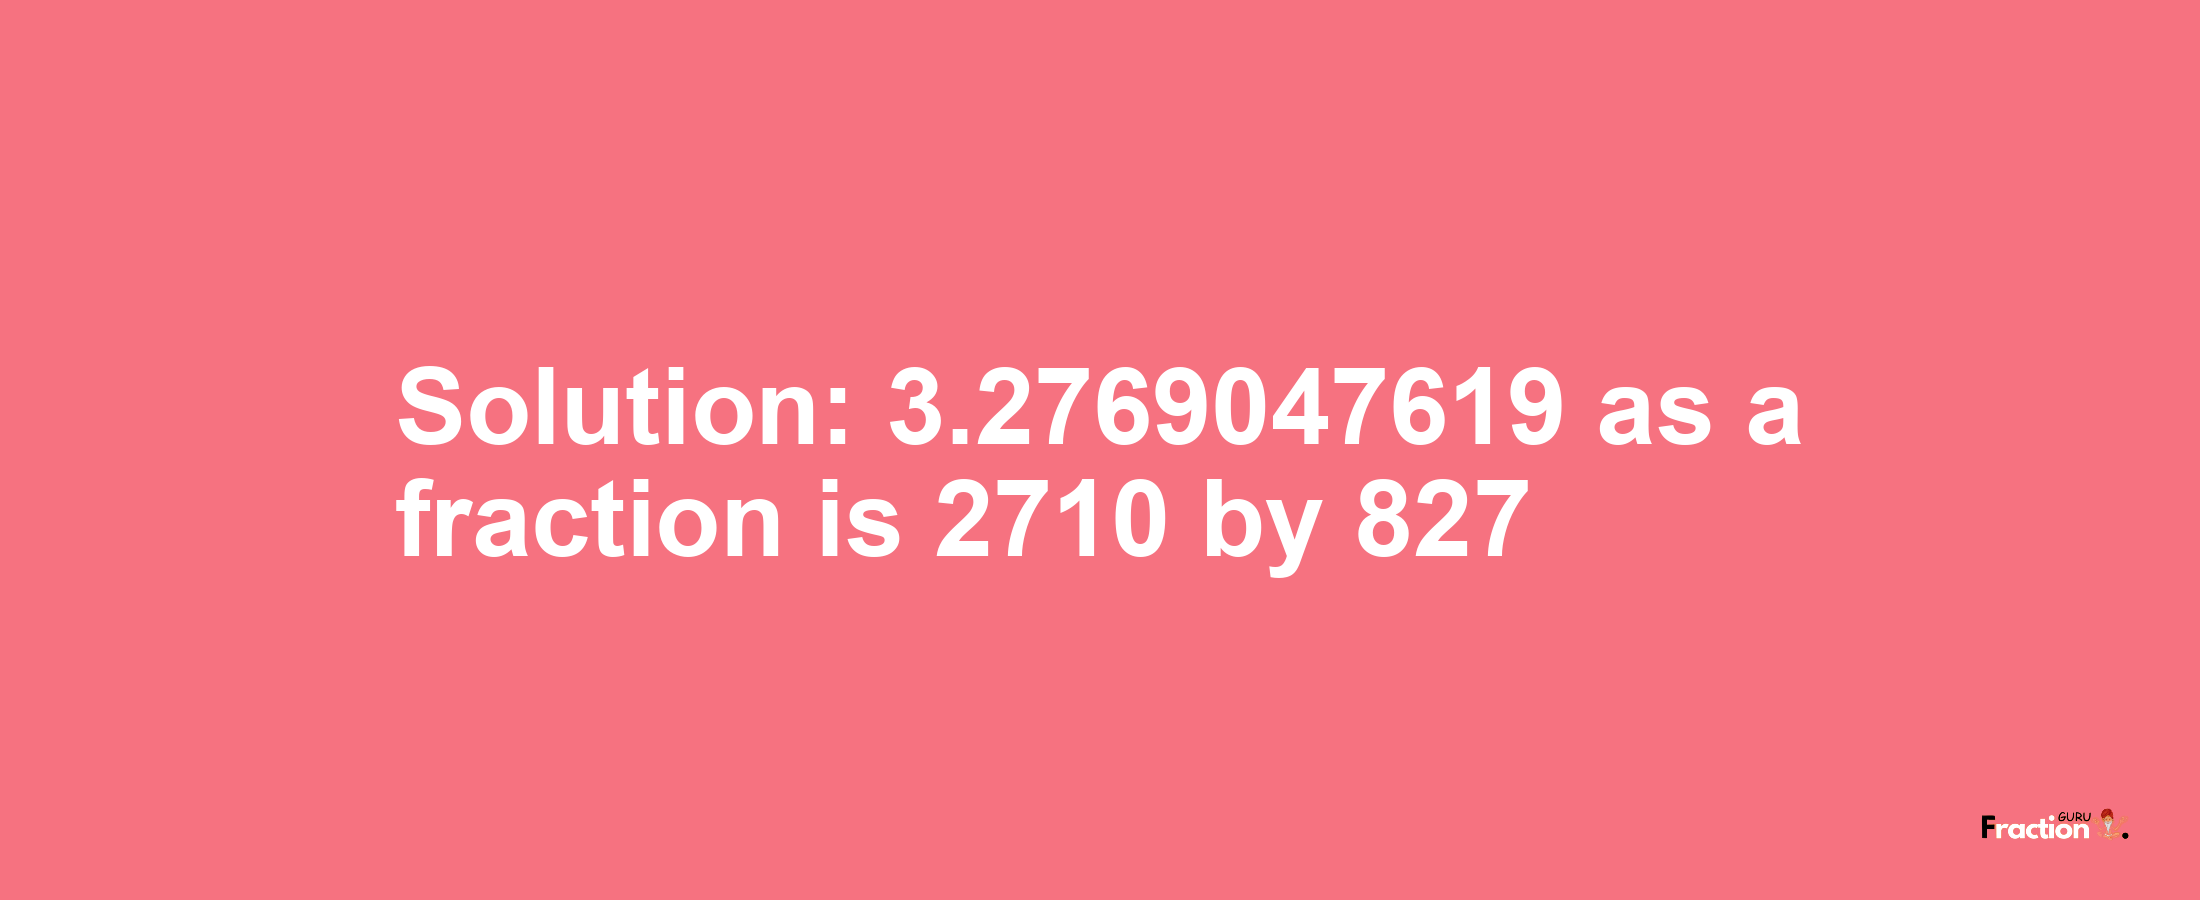 Solution:3.2769047619 as a fraction is 2710/827